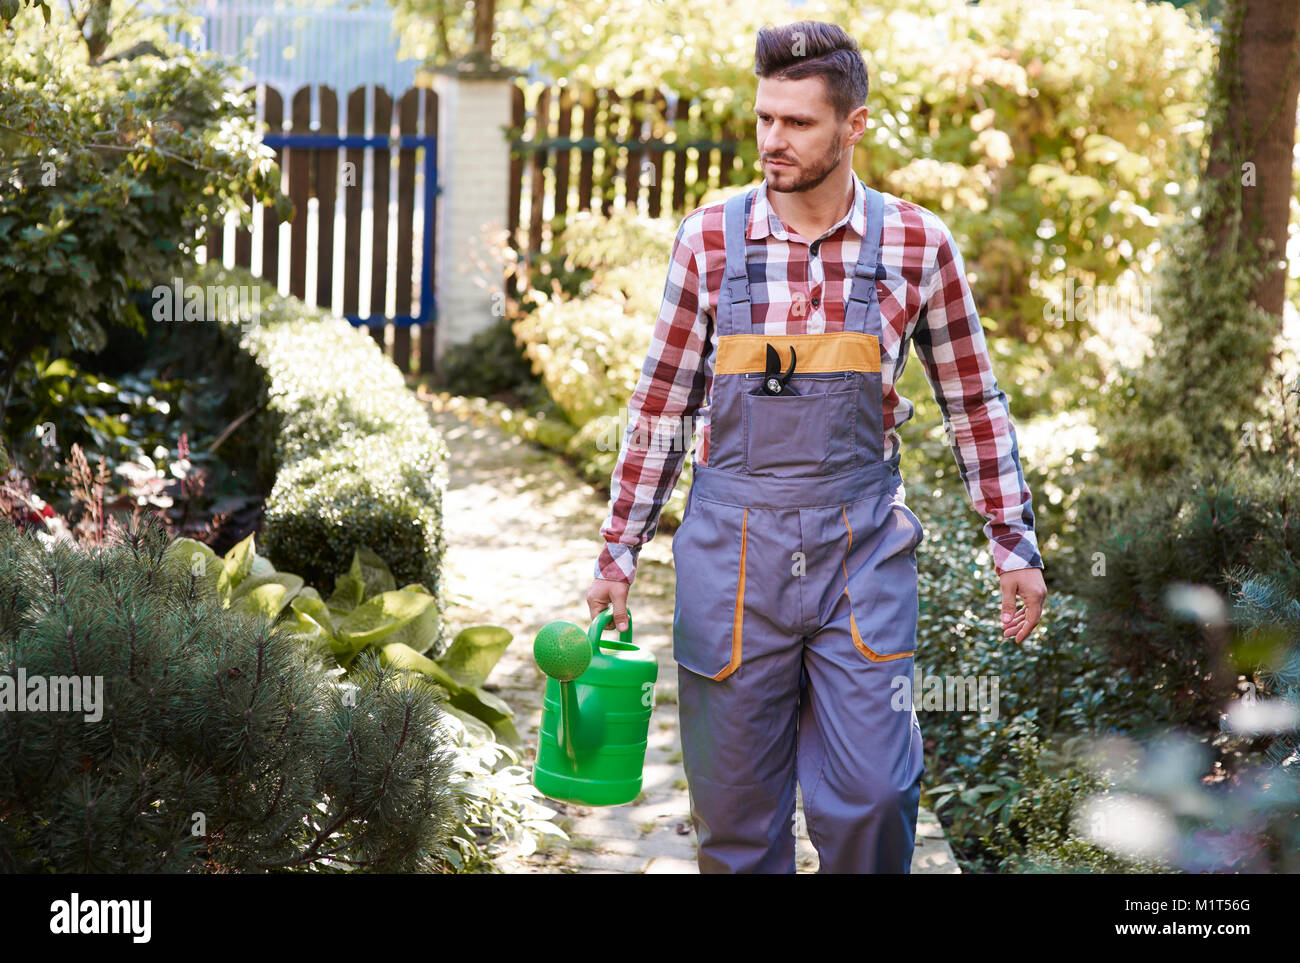 Man with  watering can at garden Stock Photo